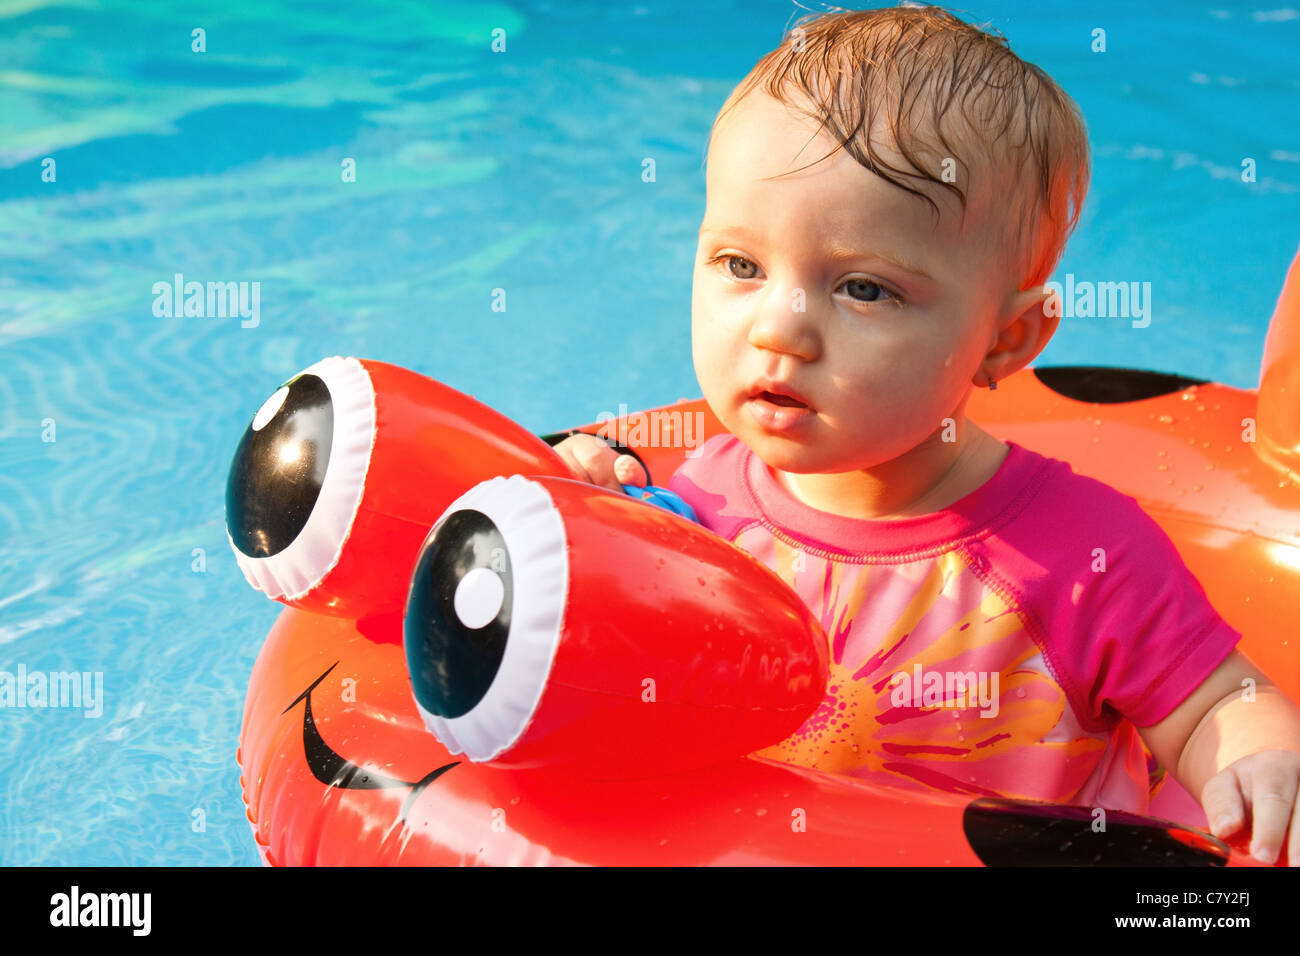 Baby girl staring while floating in a pool Stock Photo